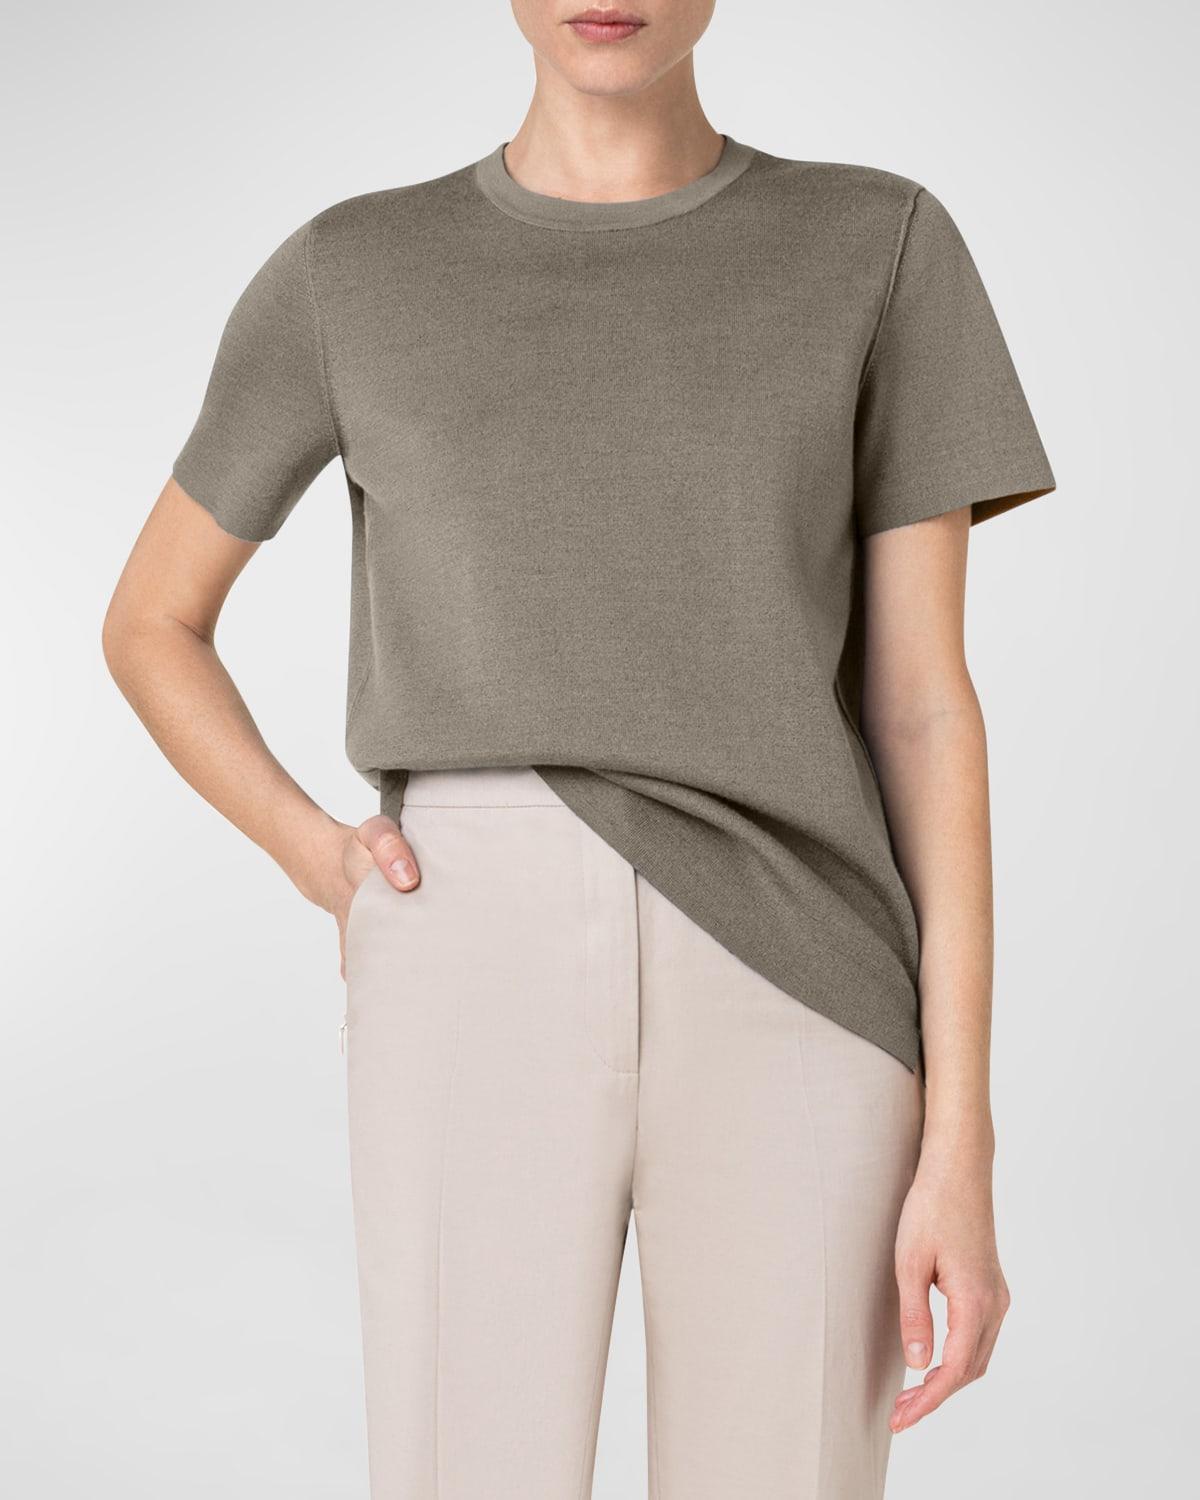 Akris Bi-color Reversible Knit Wool Pullover Shirt in Gray | Lyst